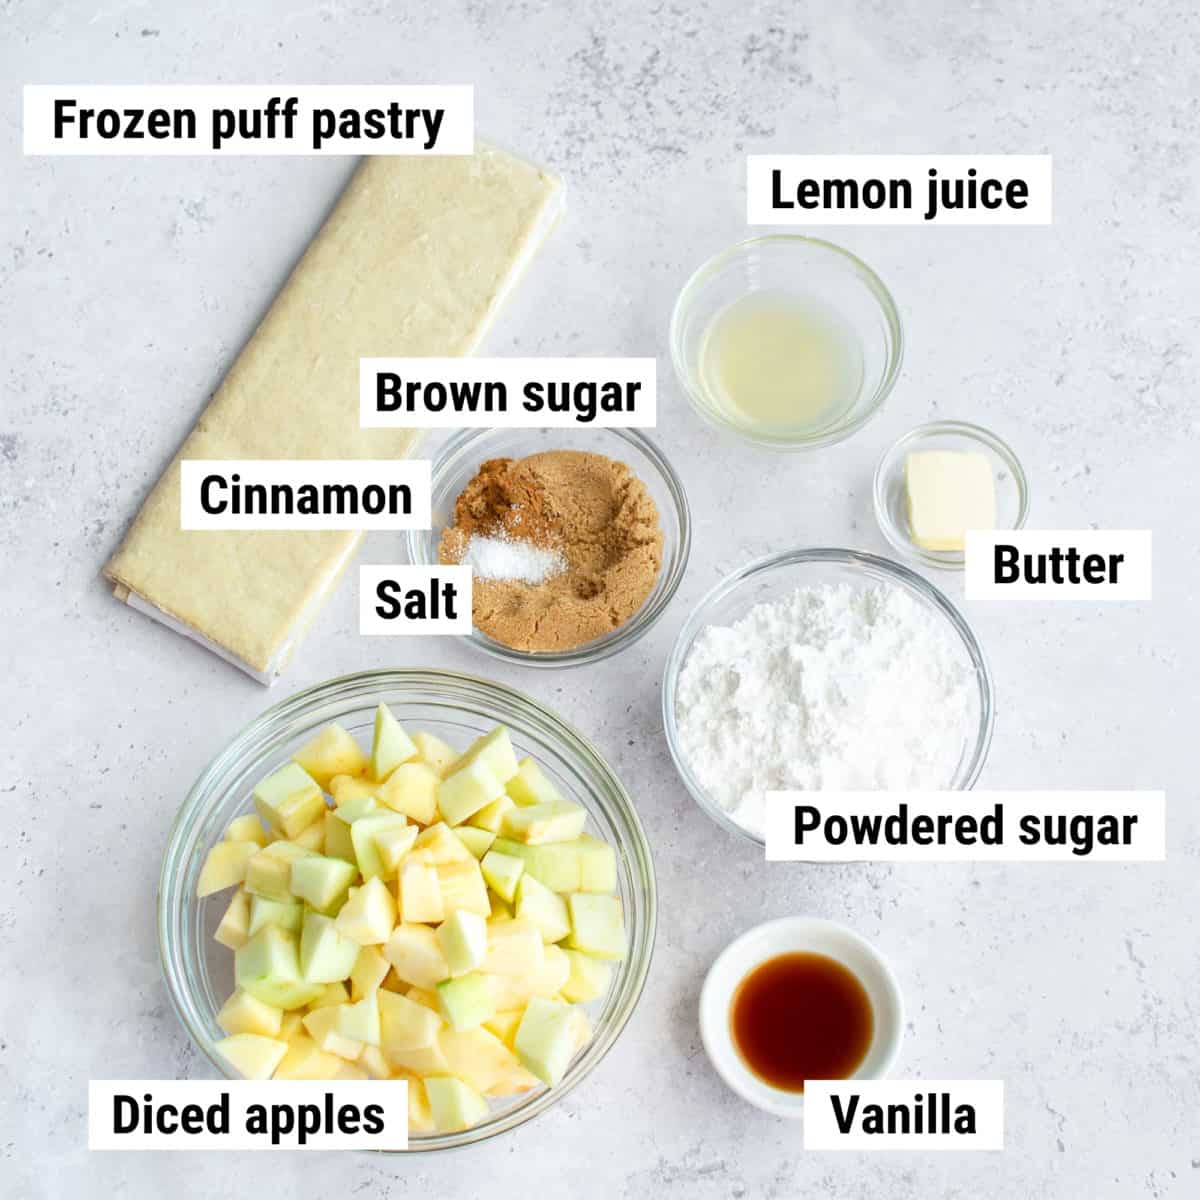 The ingredients used to make puff pastry apple turnovers laid out on a table.